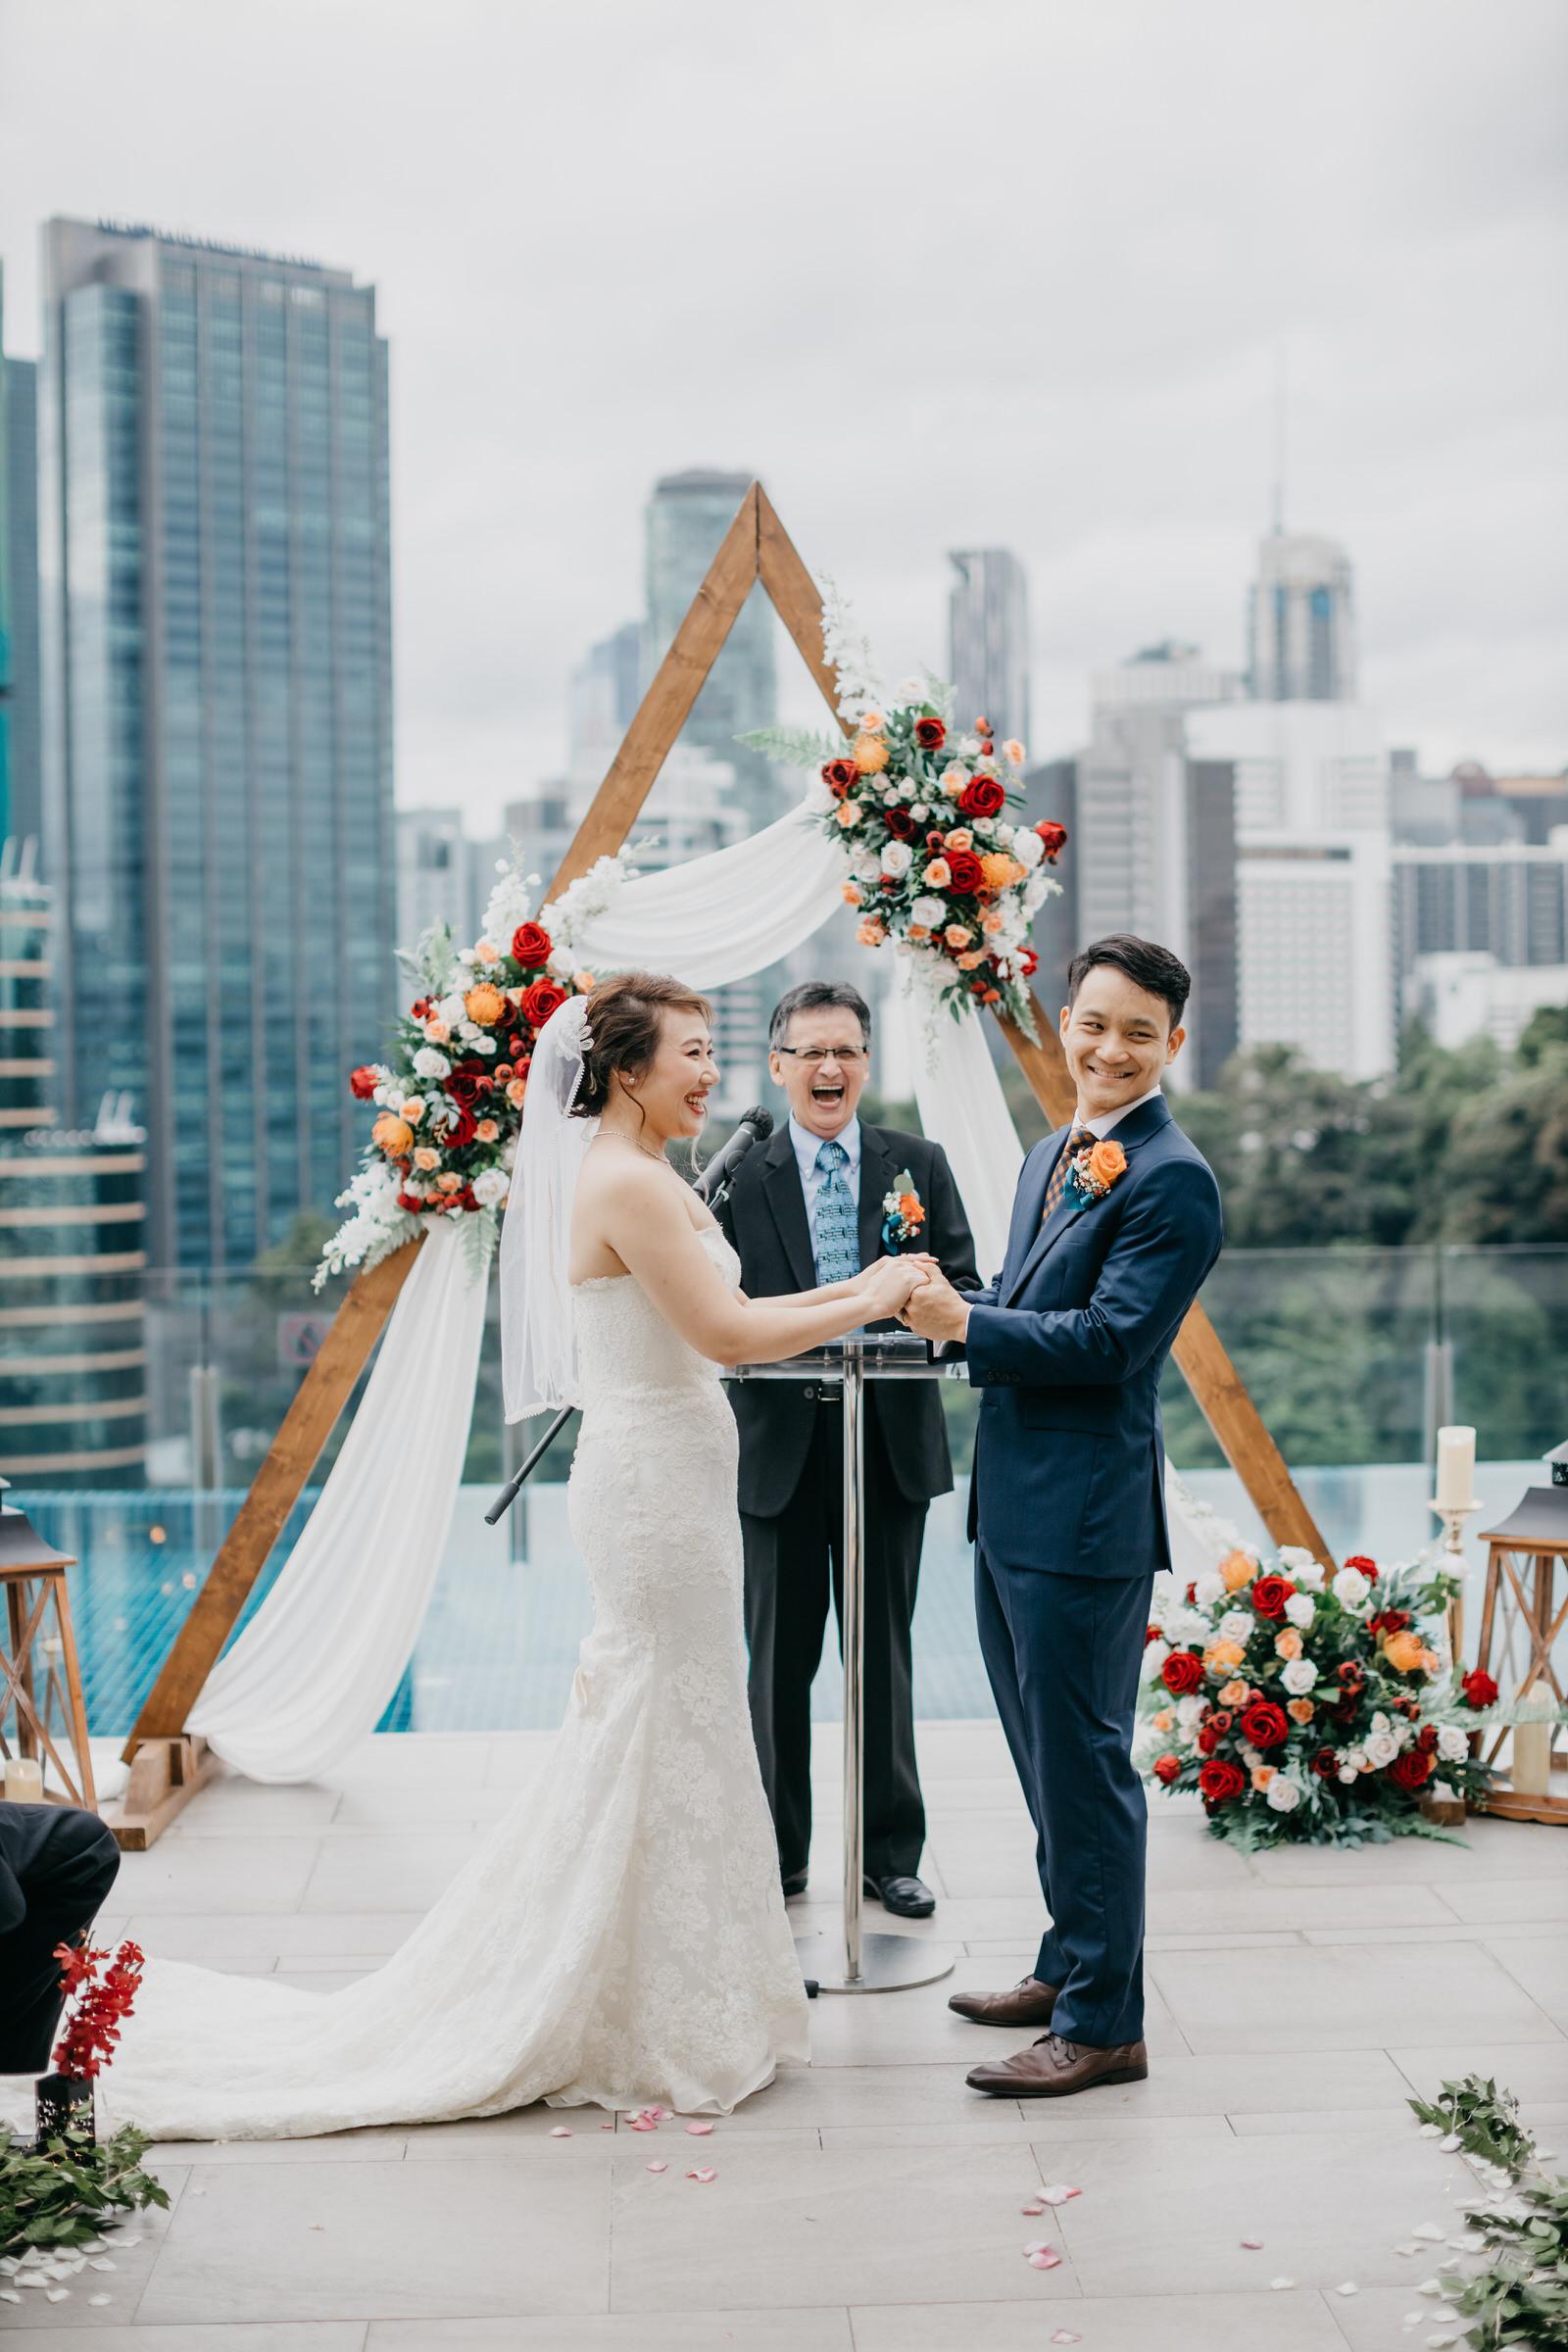 Vow Rings Exchange Boho Deco Rooftop Poolside Wedding at Hotel Stripes Kuala Lumpur MCO2.0 Cliff Choong Photography Malaysia Covid19 ROM 